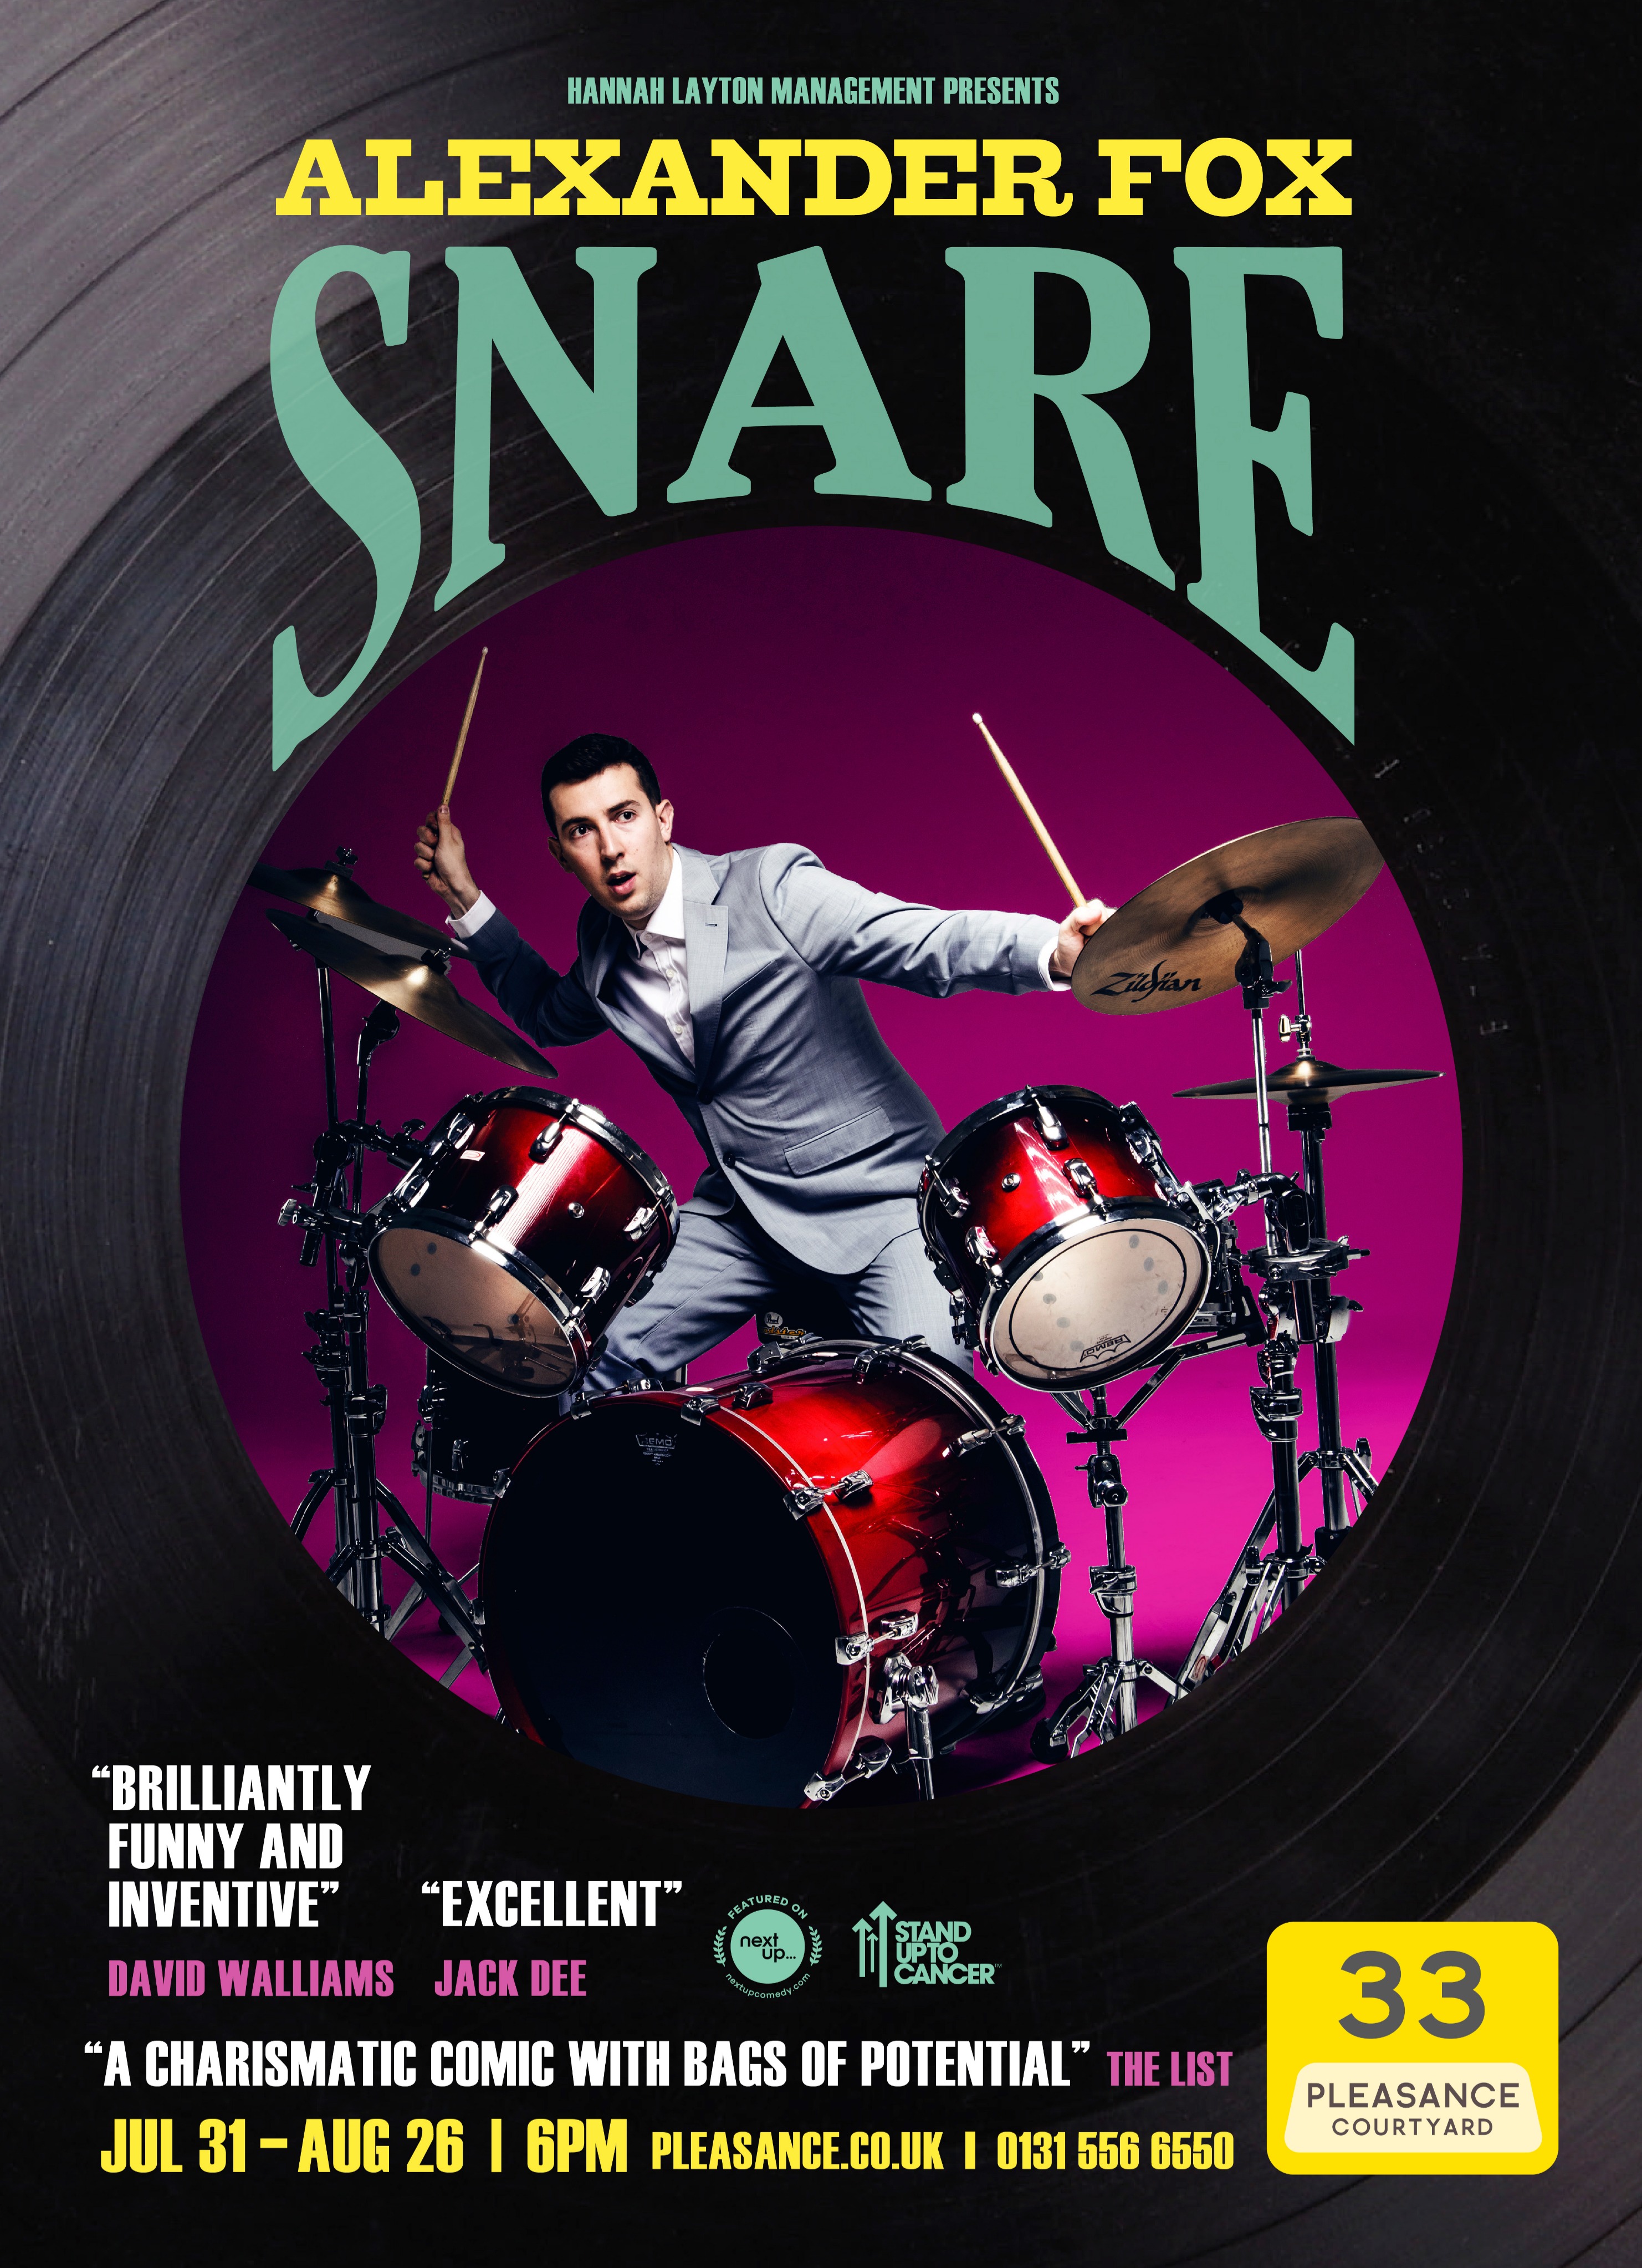 The poster for Alexander Fox: Snare